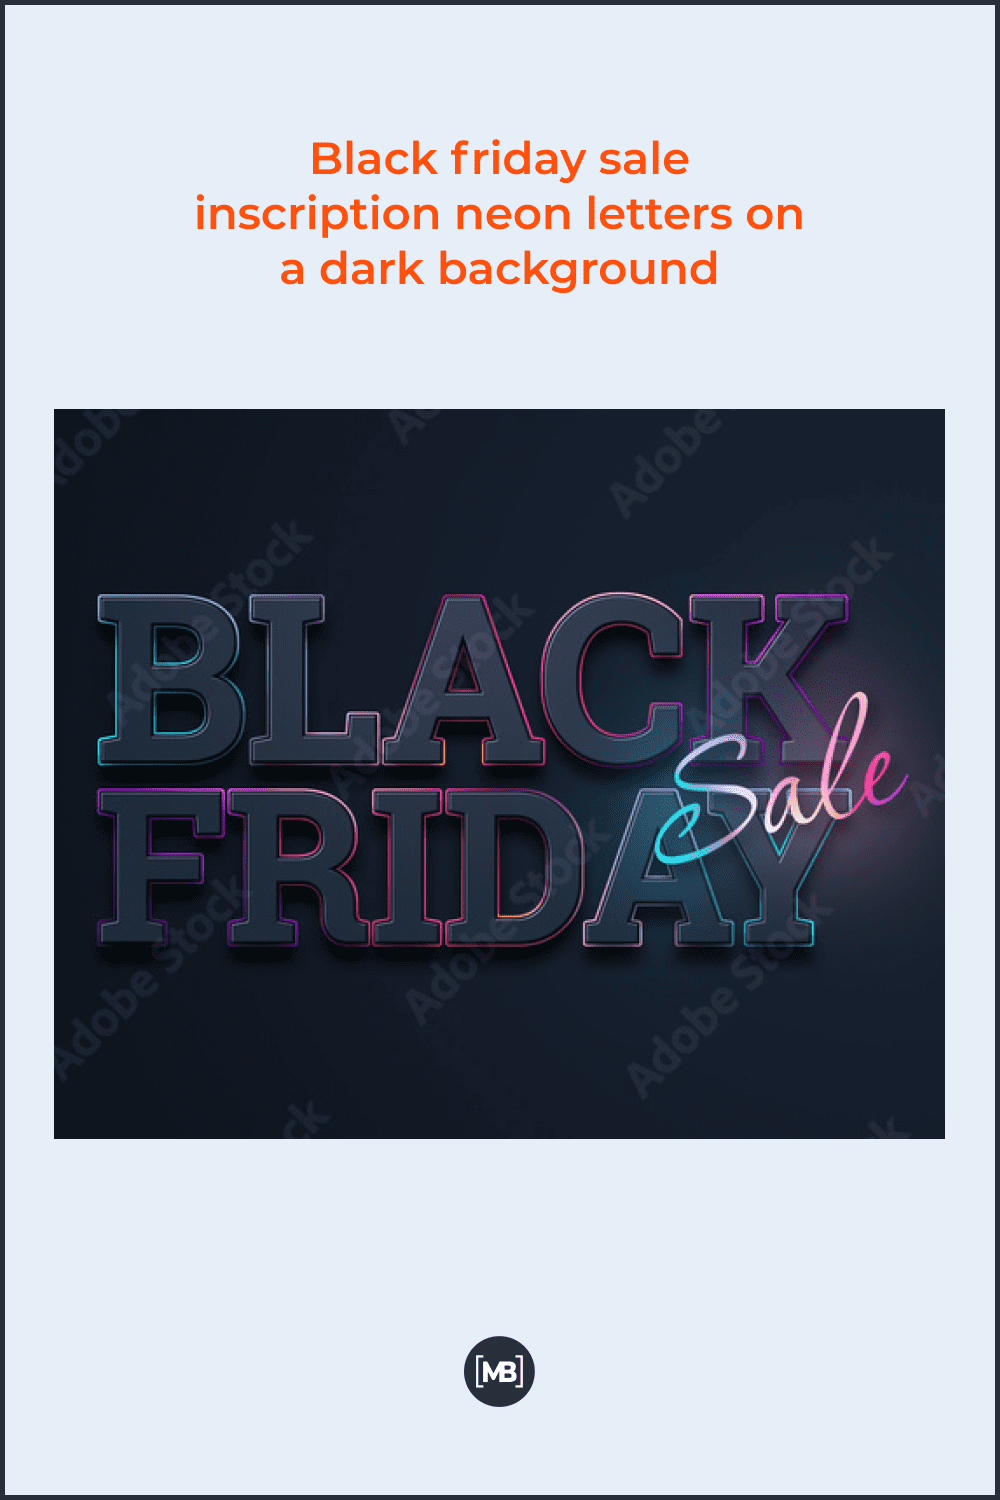 Black Friday sale inscription neon letters on a dark background.